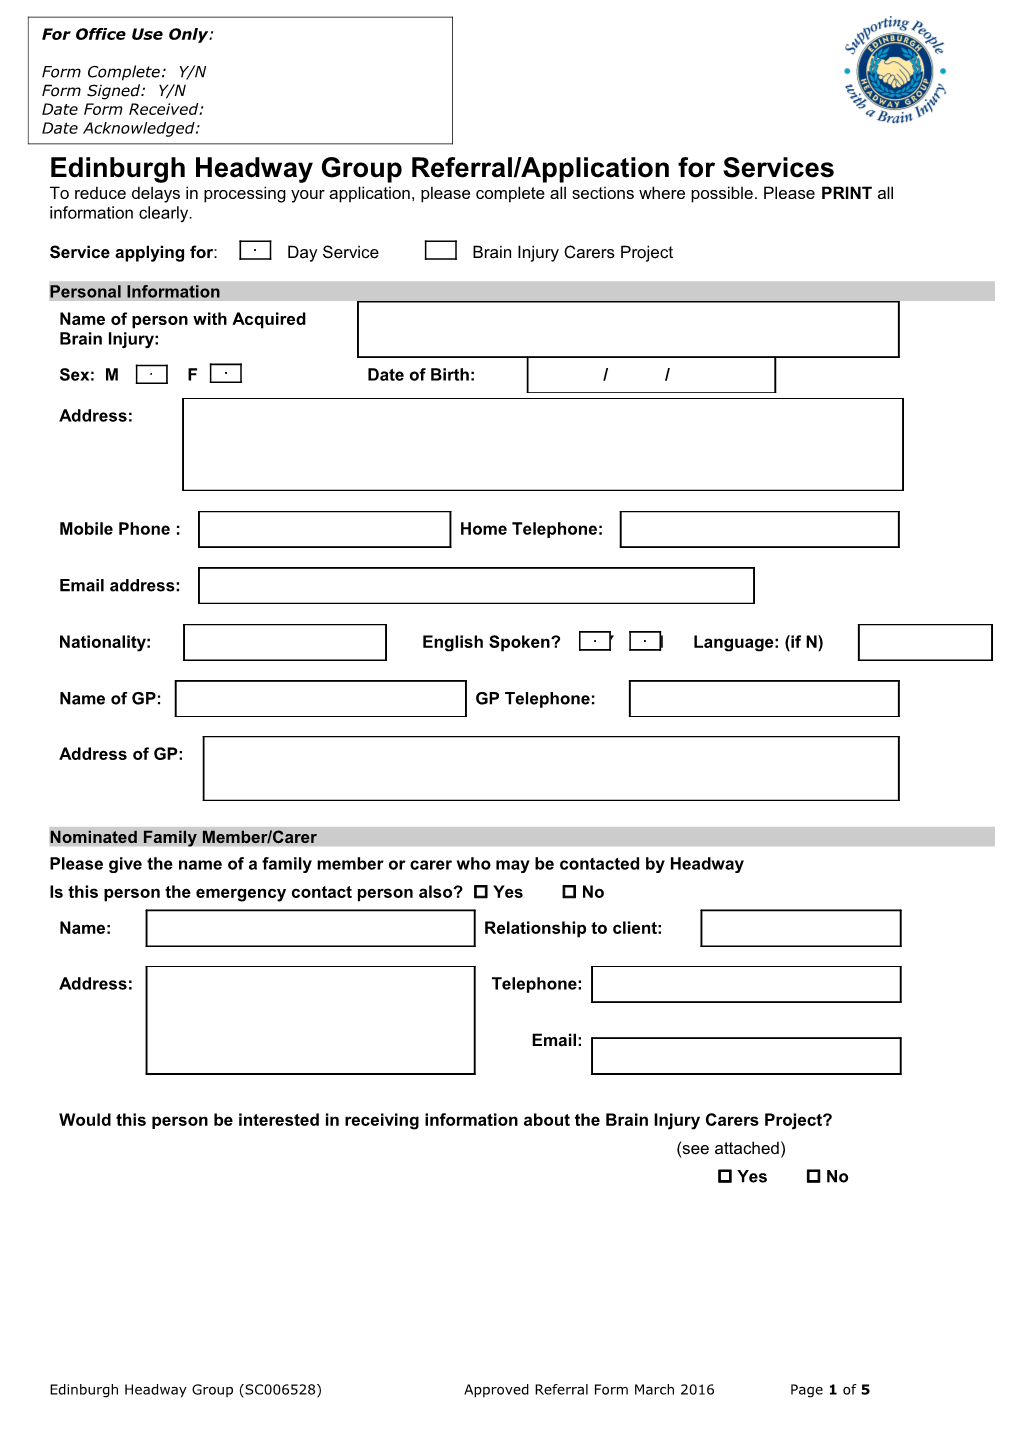 Edinburgh Headway Group Referral/Application for Services